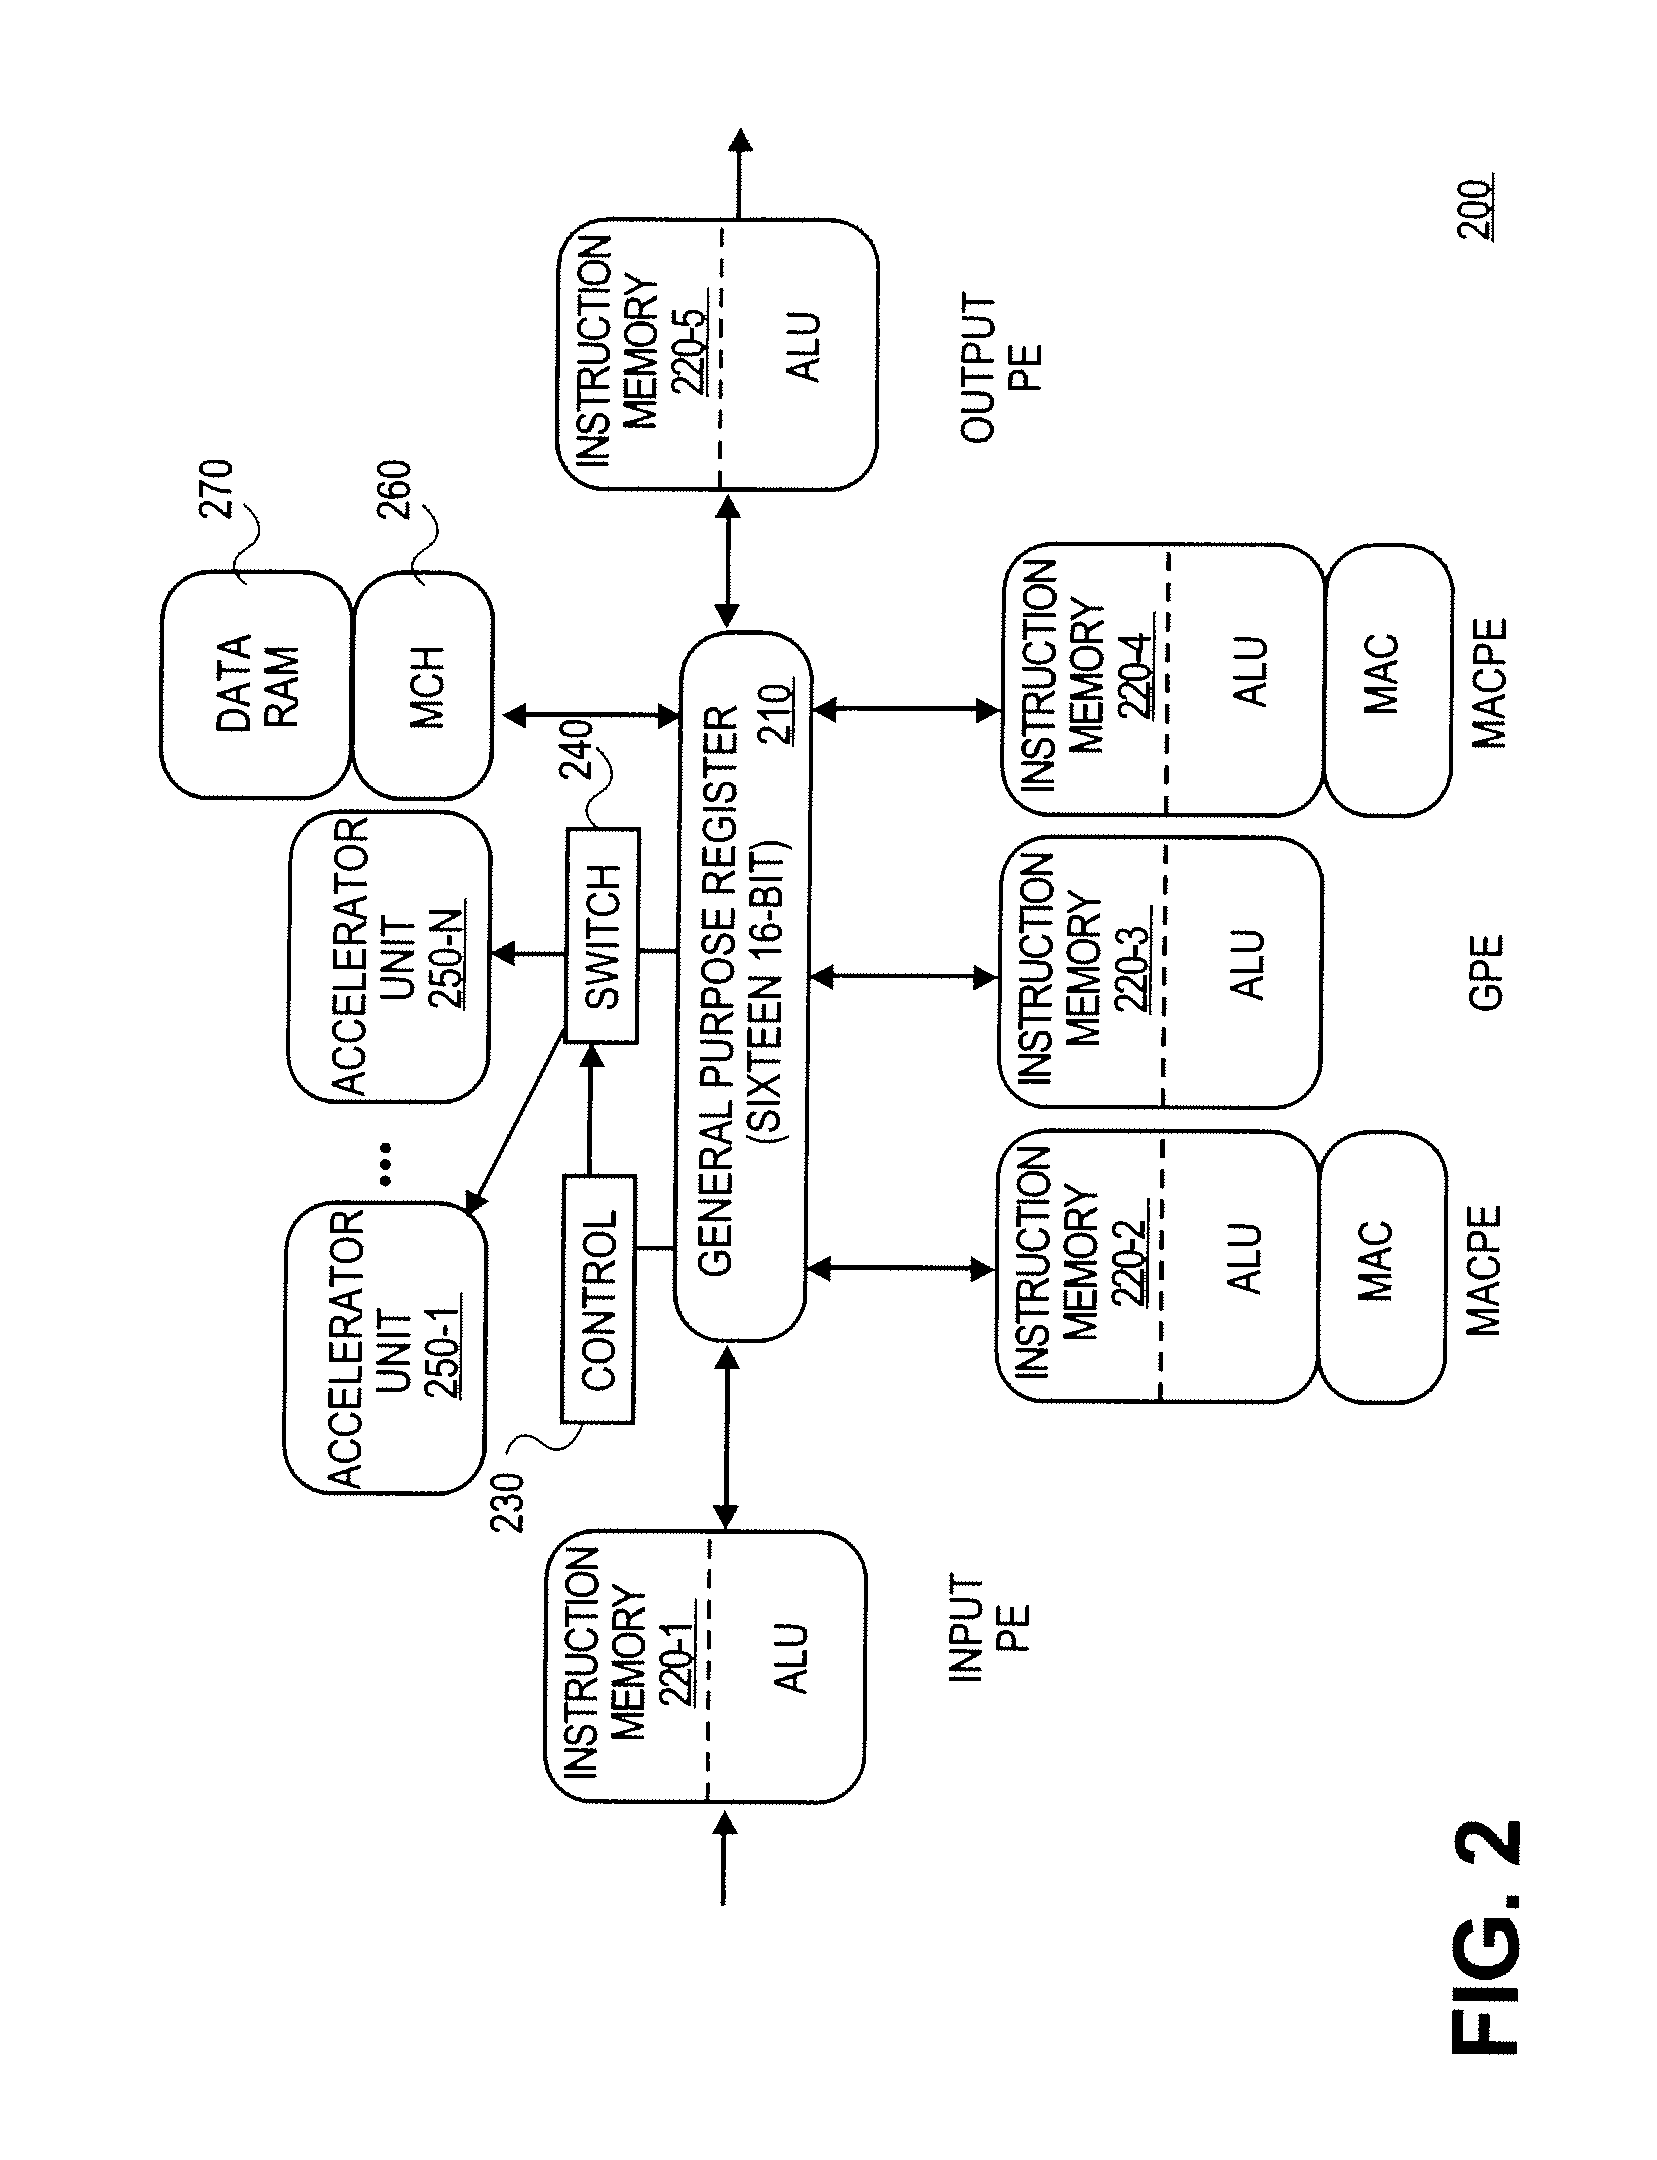 Apparatus and method for selectable hardware accelerators in a data driven architecture